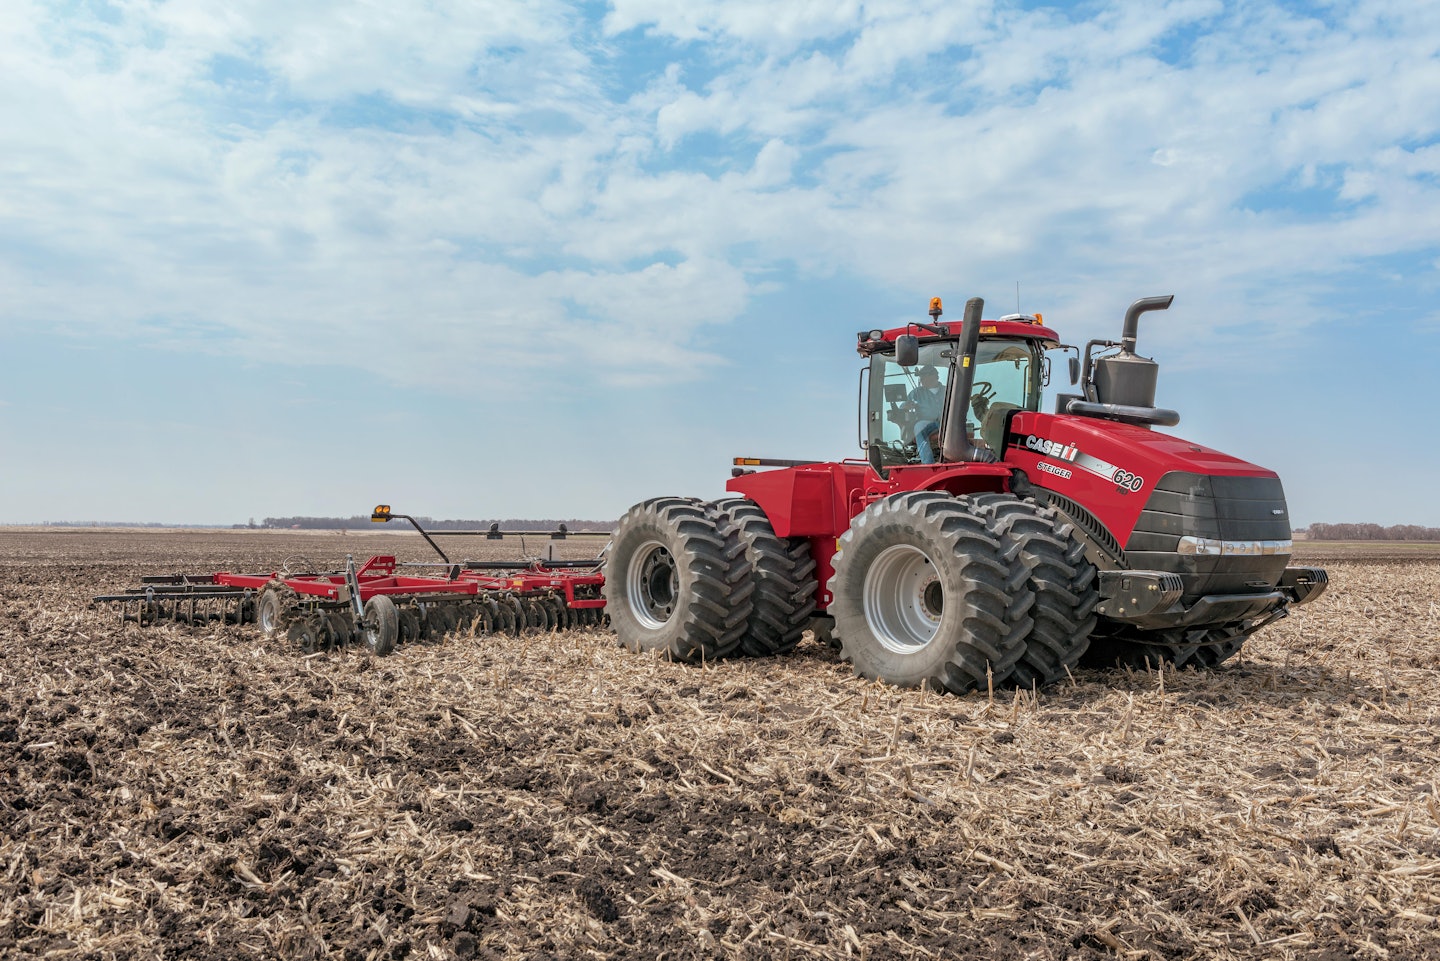 The Steiger 620 offers up to 680 horsepower to tackle difficult terrain and tough conditions.